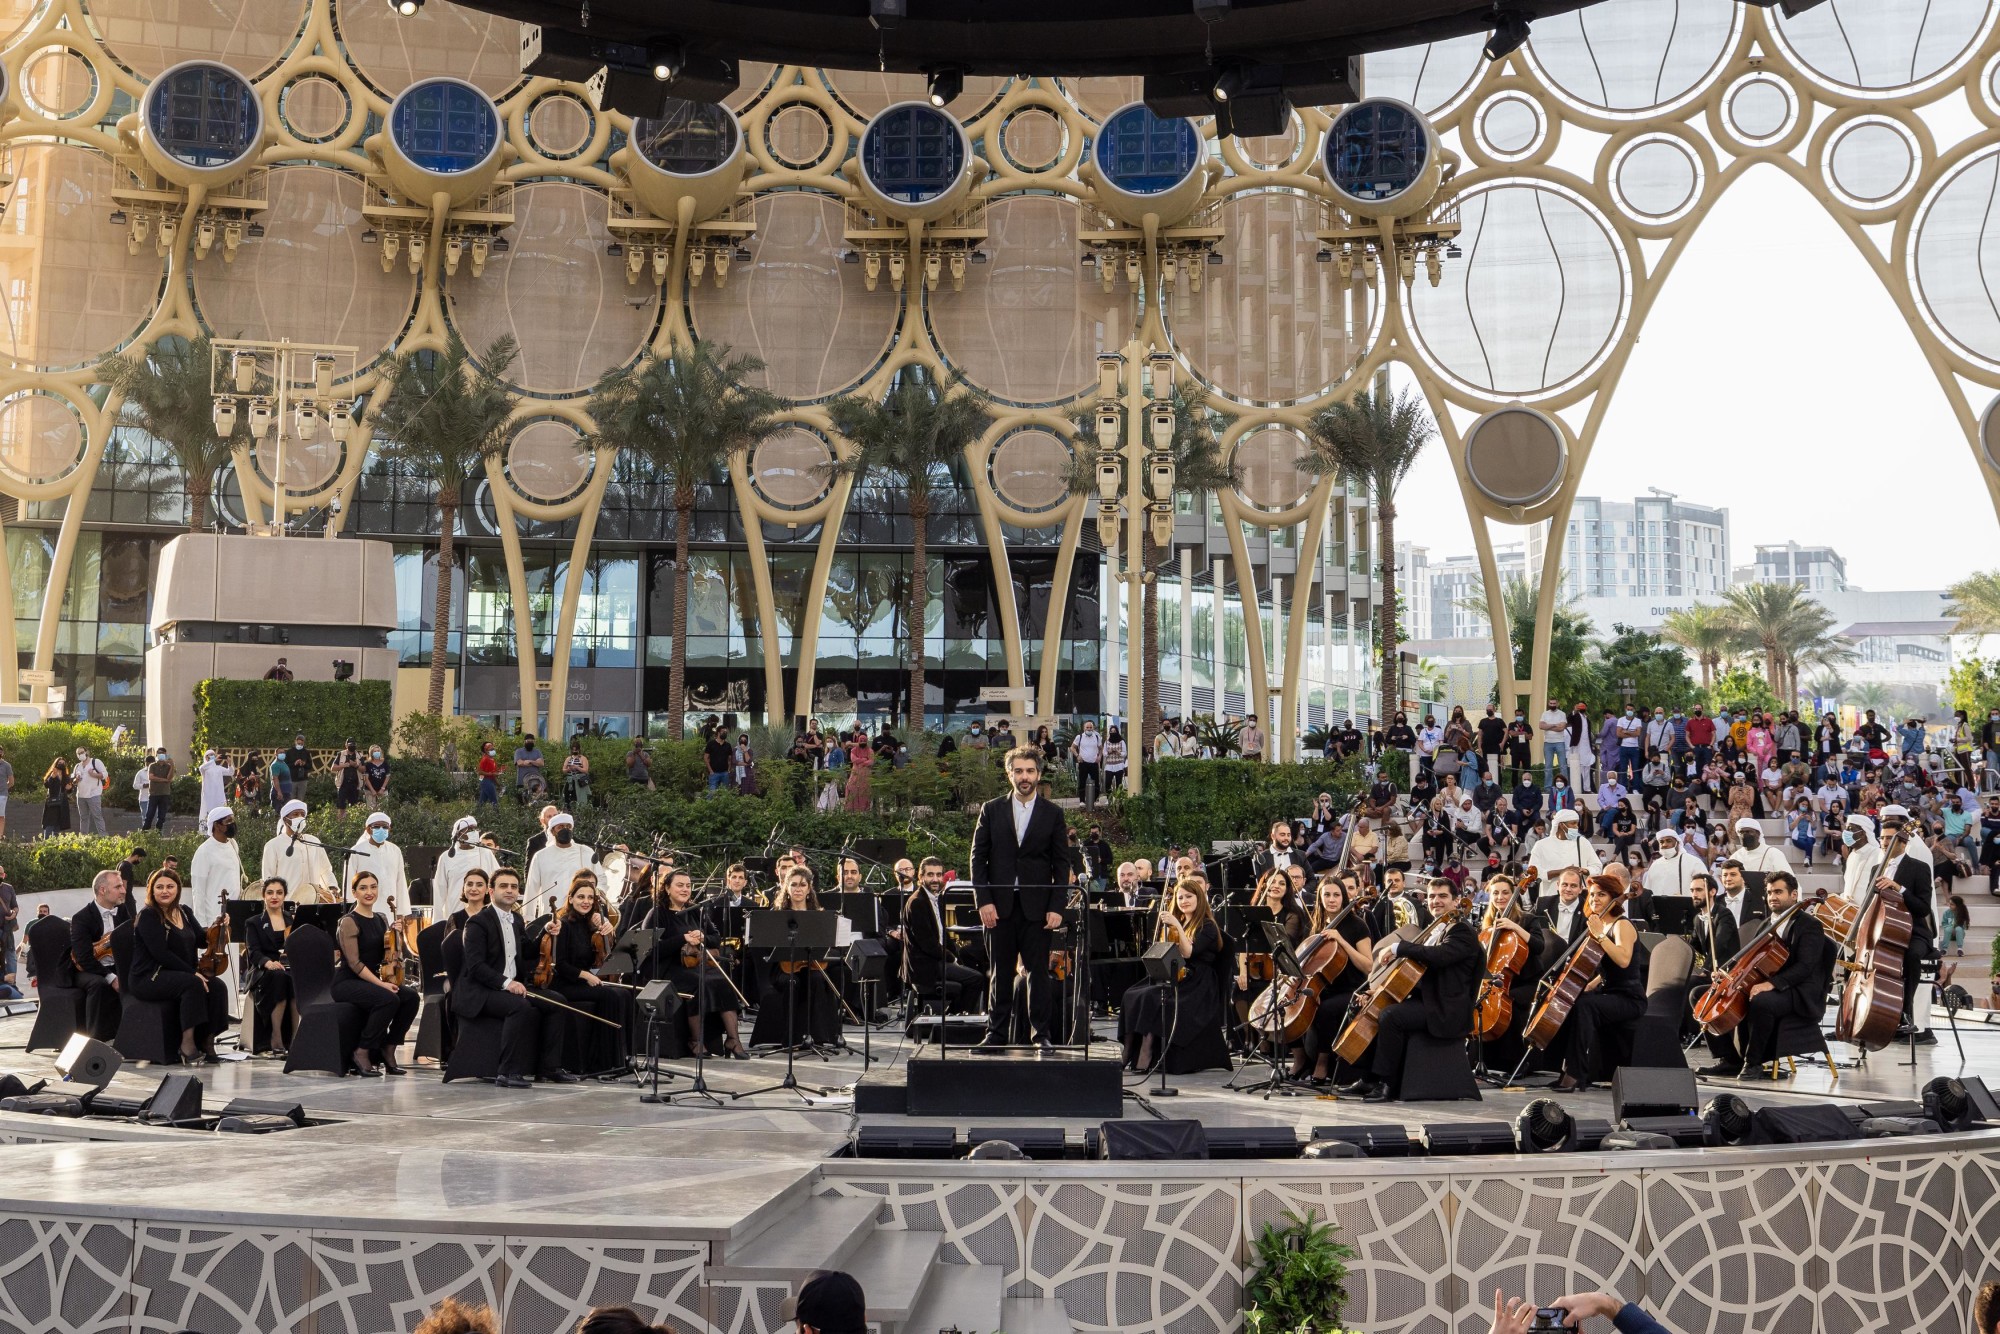 A group photo of the Armenian State Symphony Orchestra and the Emirati Welcome Group at Al Wasl m40447